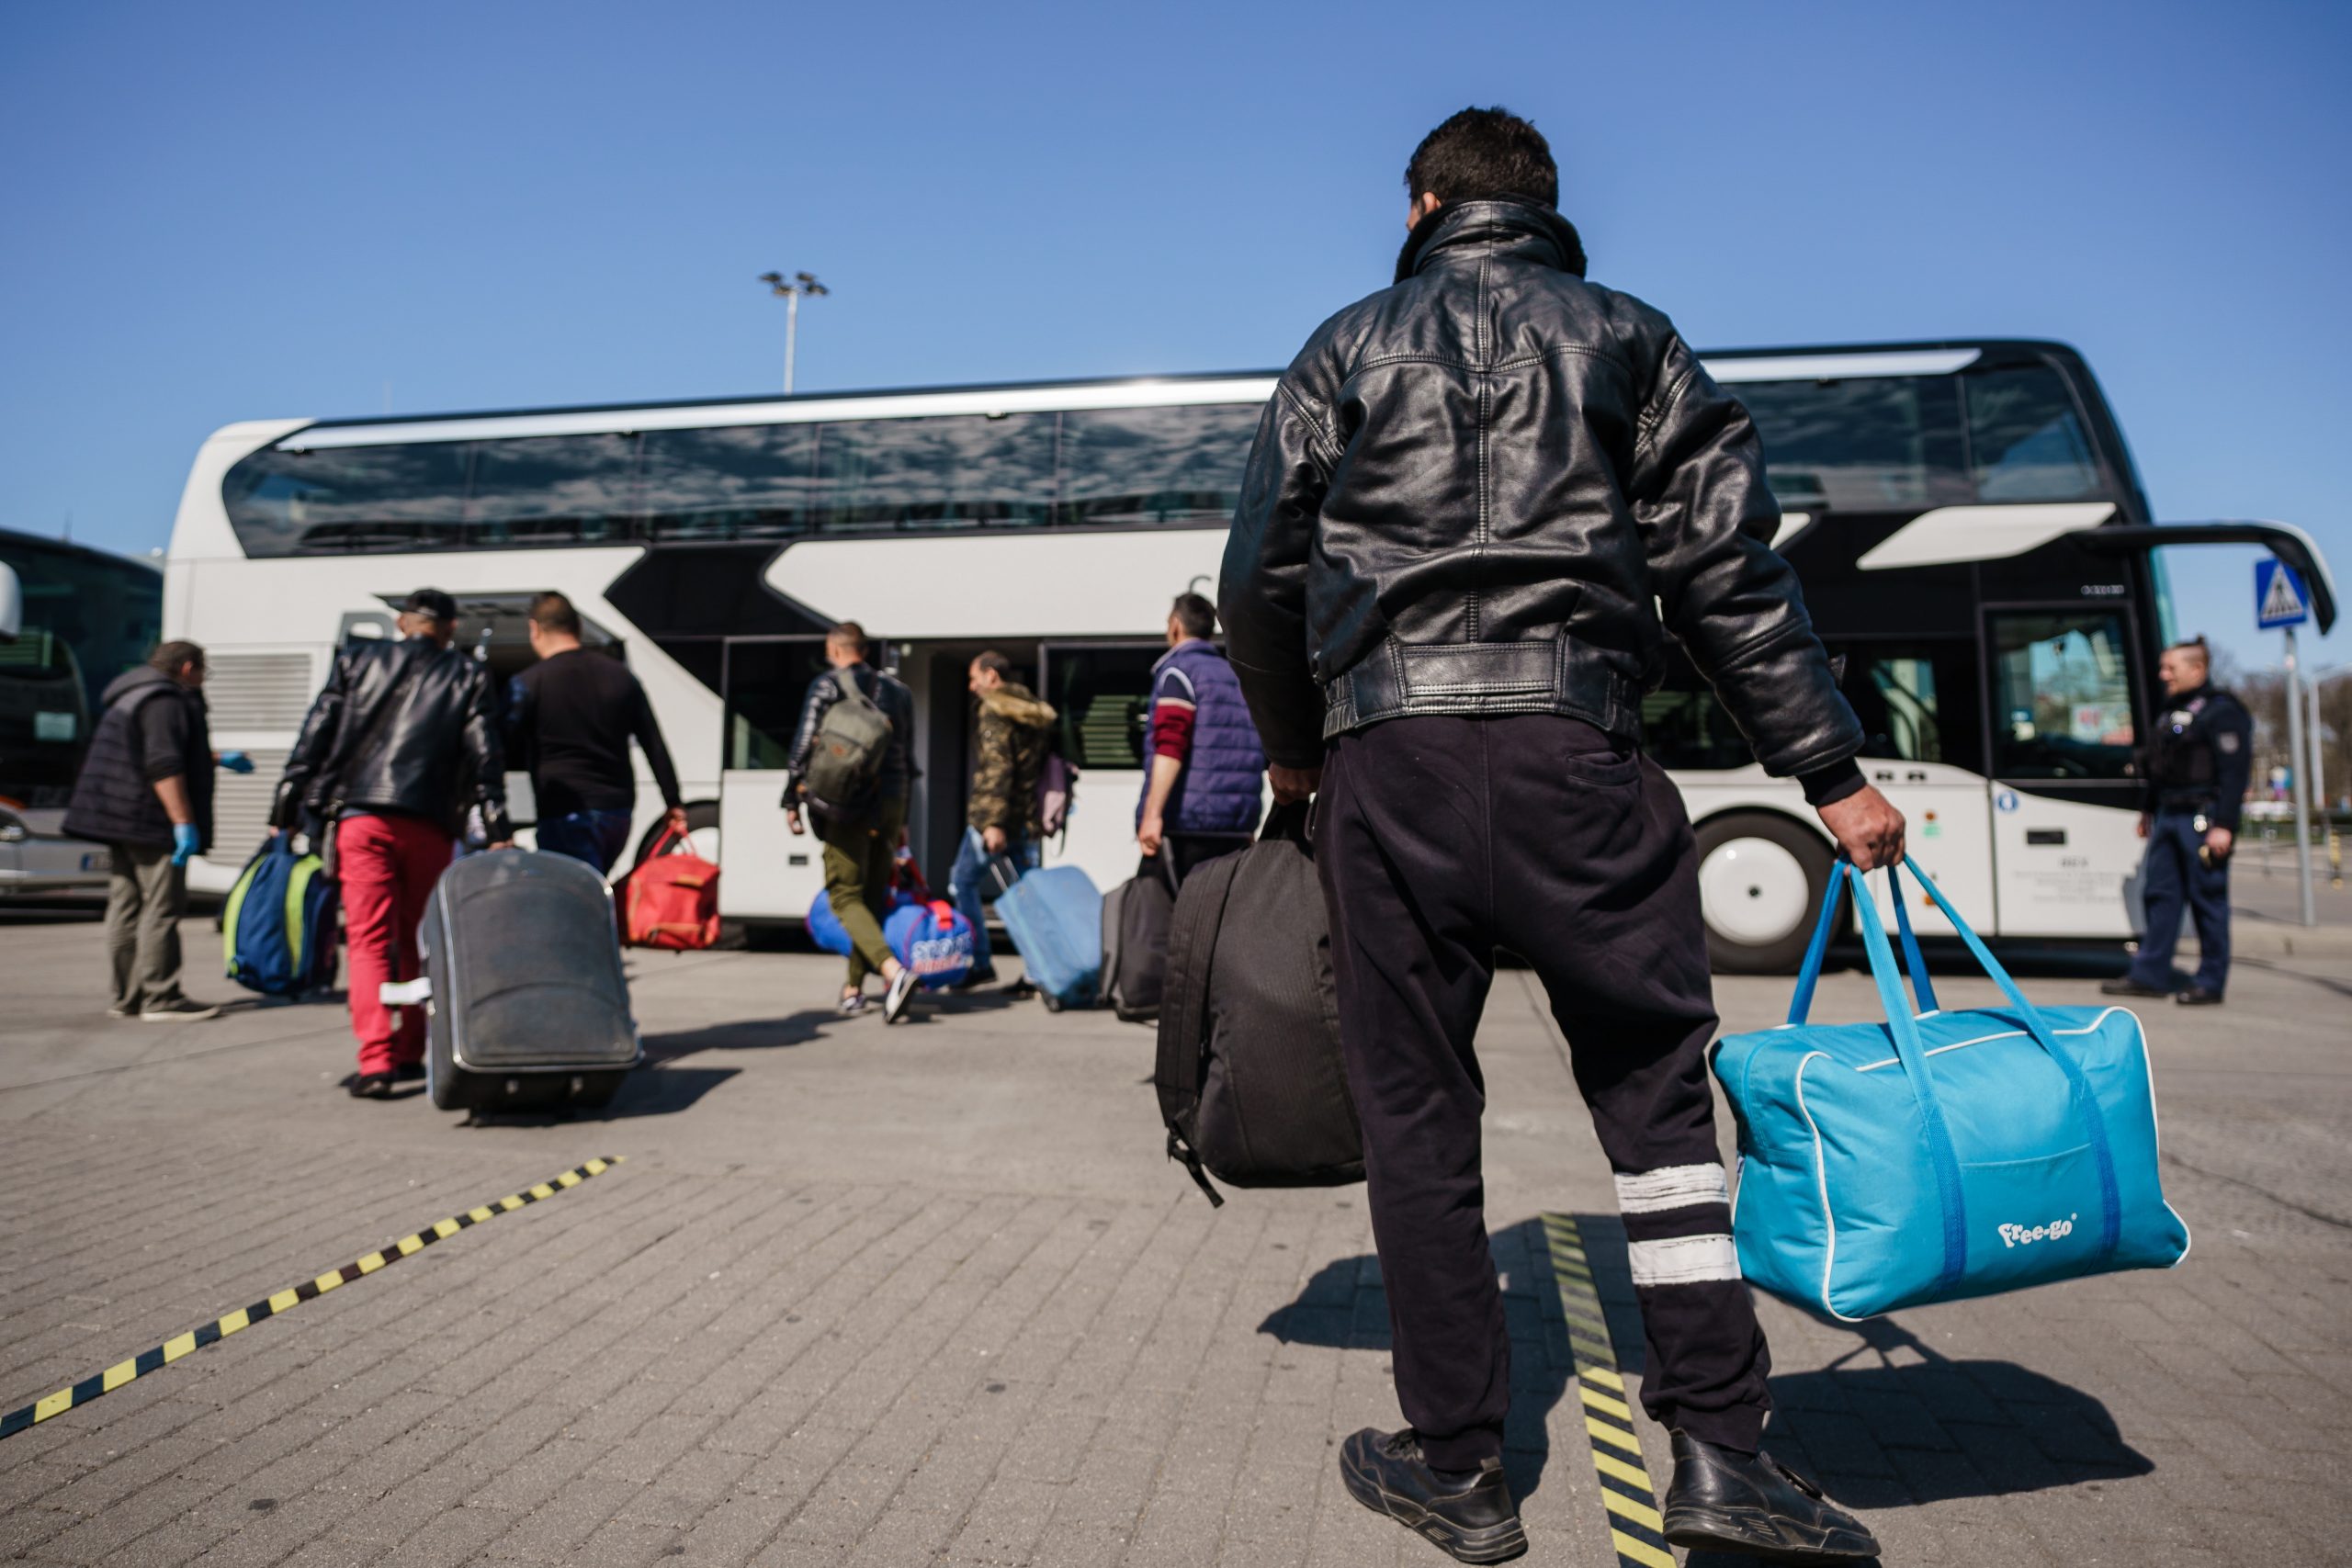 epa08352652 Seasonal harvest workers, who arrived with a charter flight from Romania, walk towards a bus, after the arrival at the Berlin-Schoenefeld airport in Schoenefeld, Germany, 09 April 2020. Due to the ongoing pandemic of the COVID-19 disease caused by the SARS-CoV-2 coronavirus and resulting closed boarders, a lack of harvest helpers appeared. Aircraft carrier Eurowings brings foreign workers to Germany, to support farmers in during the harvest of asparagus and strawberries.  EPA/CLEMENS BILAN